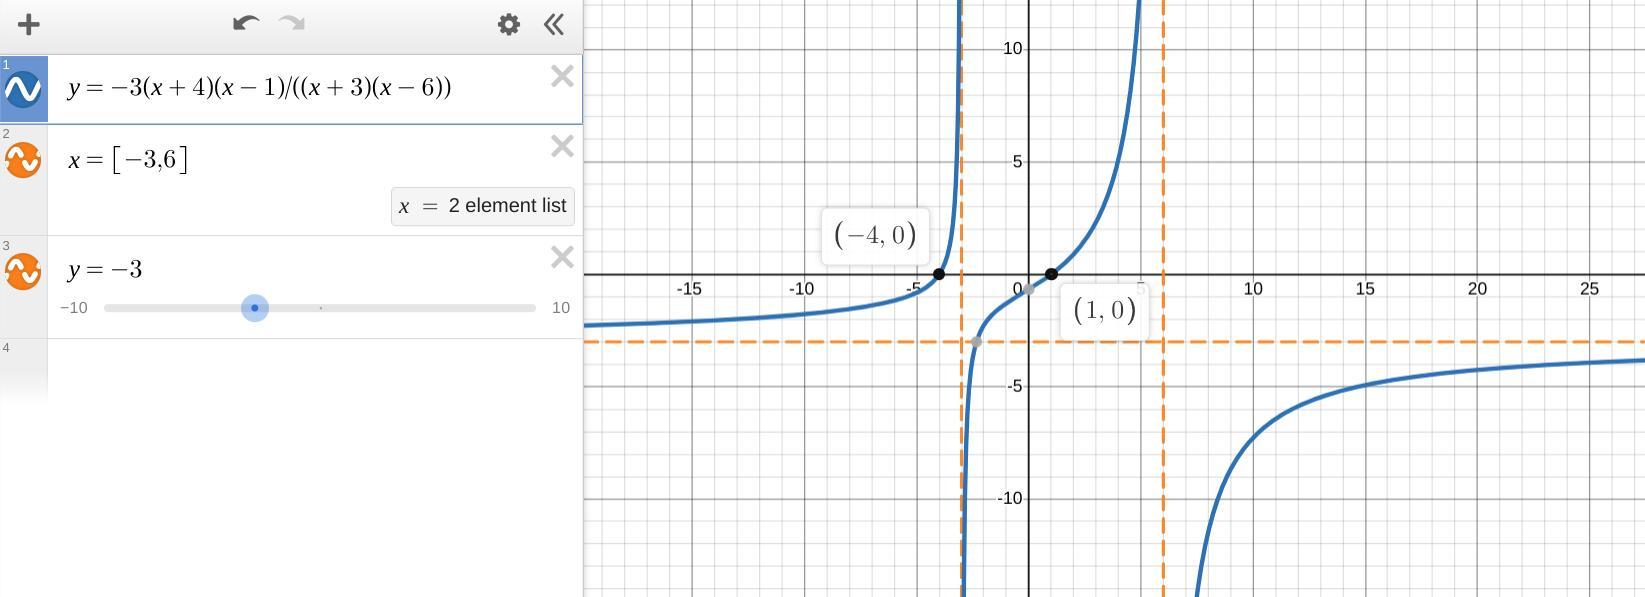 Write An Equation For A Rational Function With The Given Characteristics.Vertical Asymptotes At X = 3